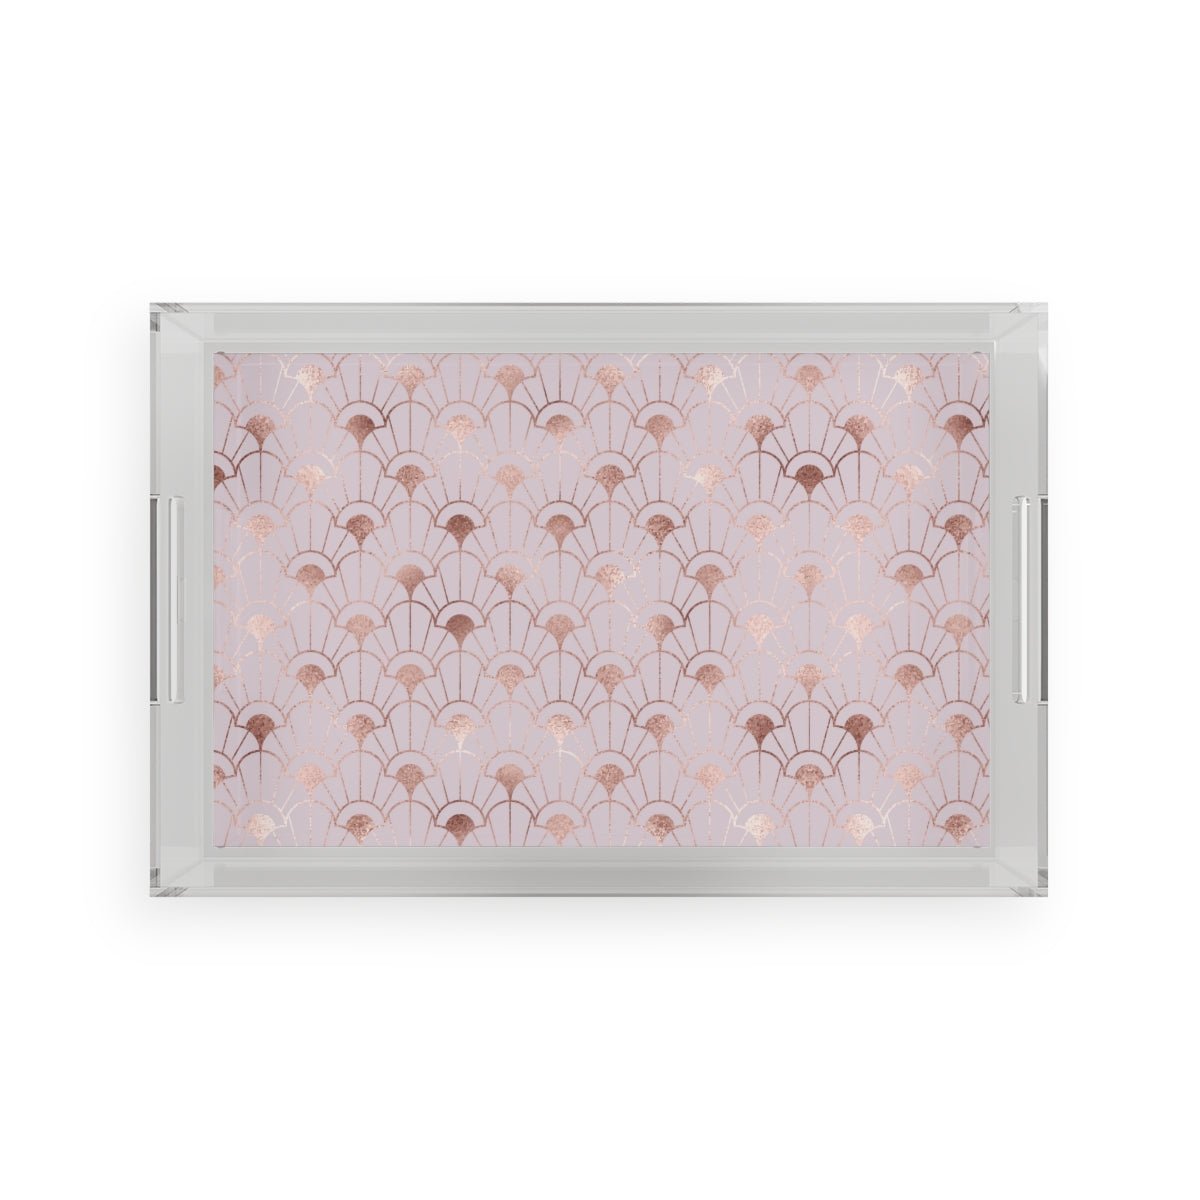 Rose Gold Art Deco Flowers Acrylic Serving Tray - Puffin Lime